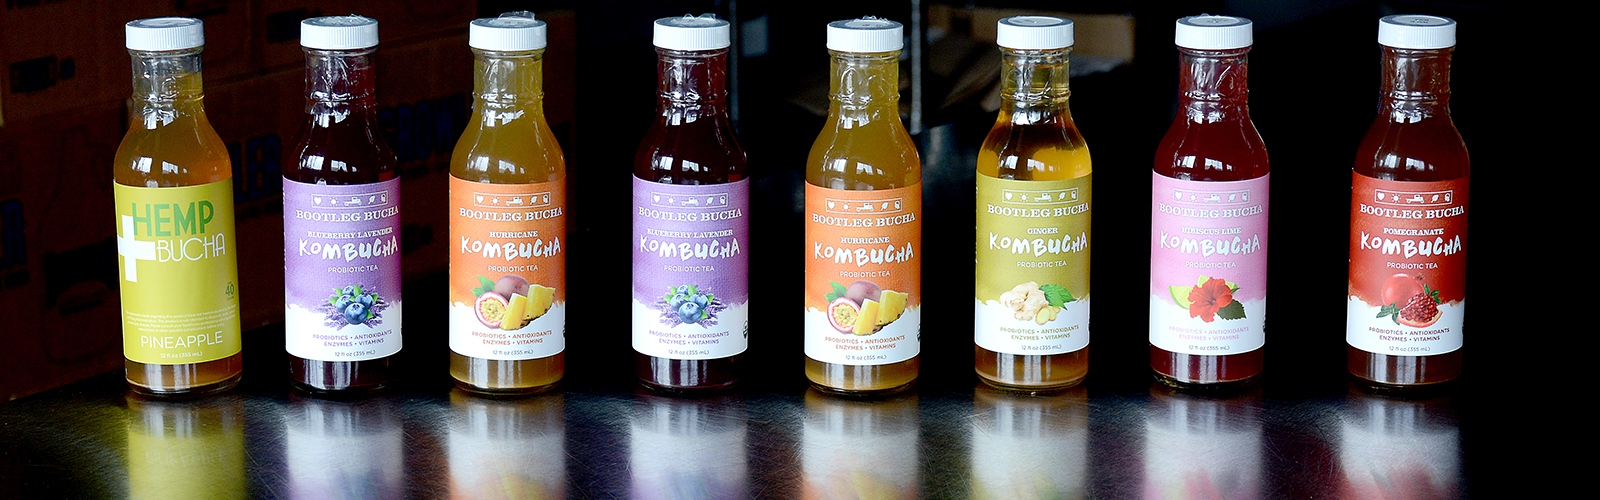 The many delicious flavors of Bootleg Bucha, New York state’s largest kombucha brewery.